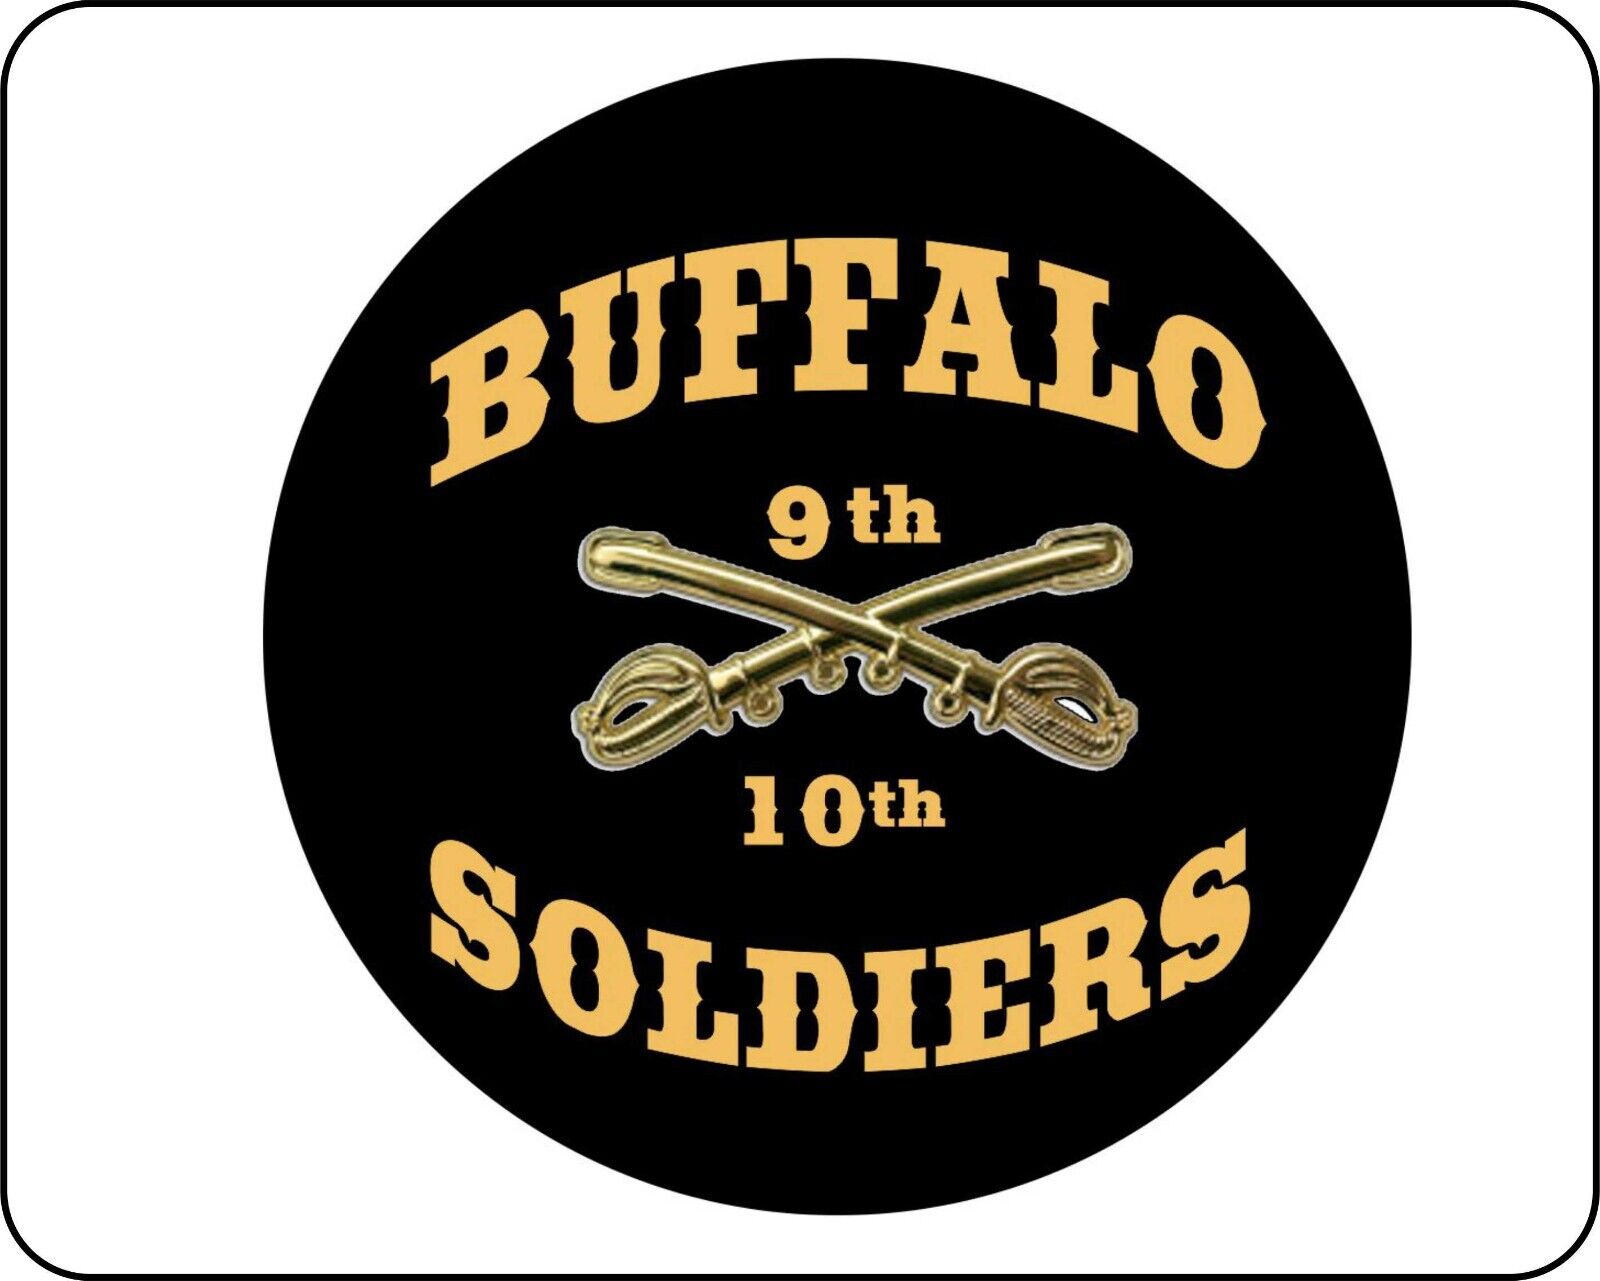 Buffalo Soldiers CivilWar Era  Mouse Pads Mousepads 9th & 10th Cavalry